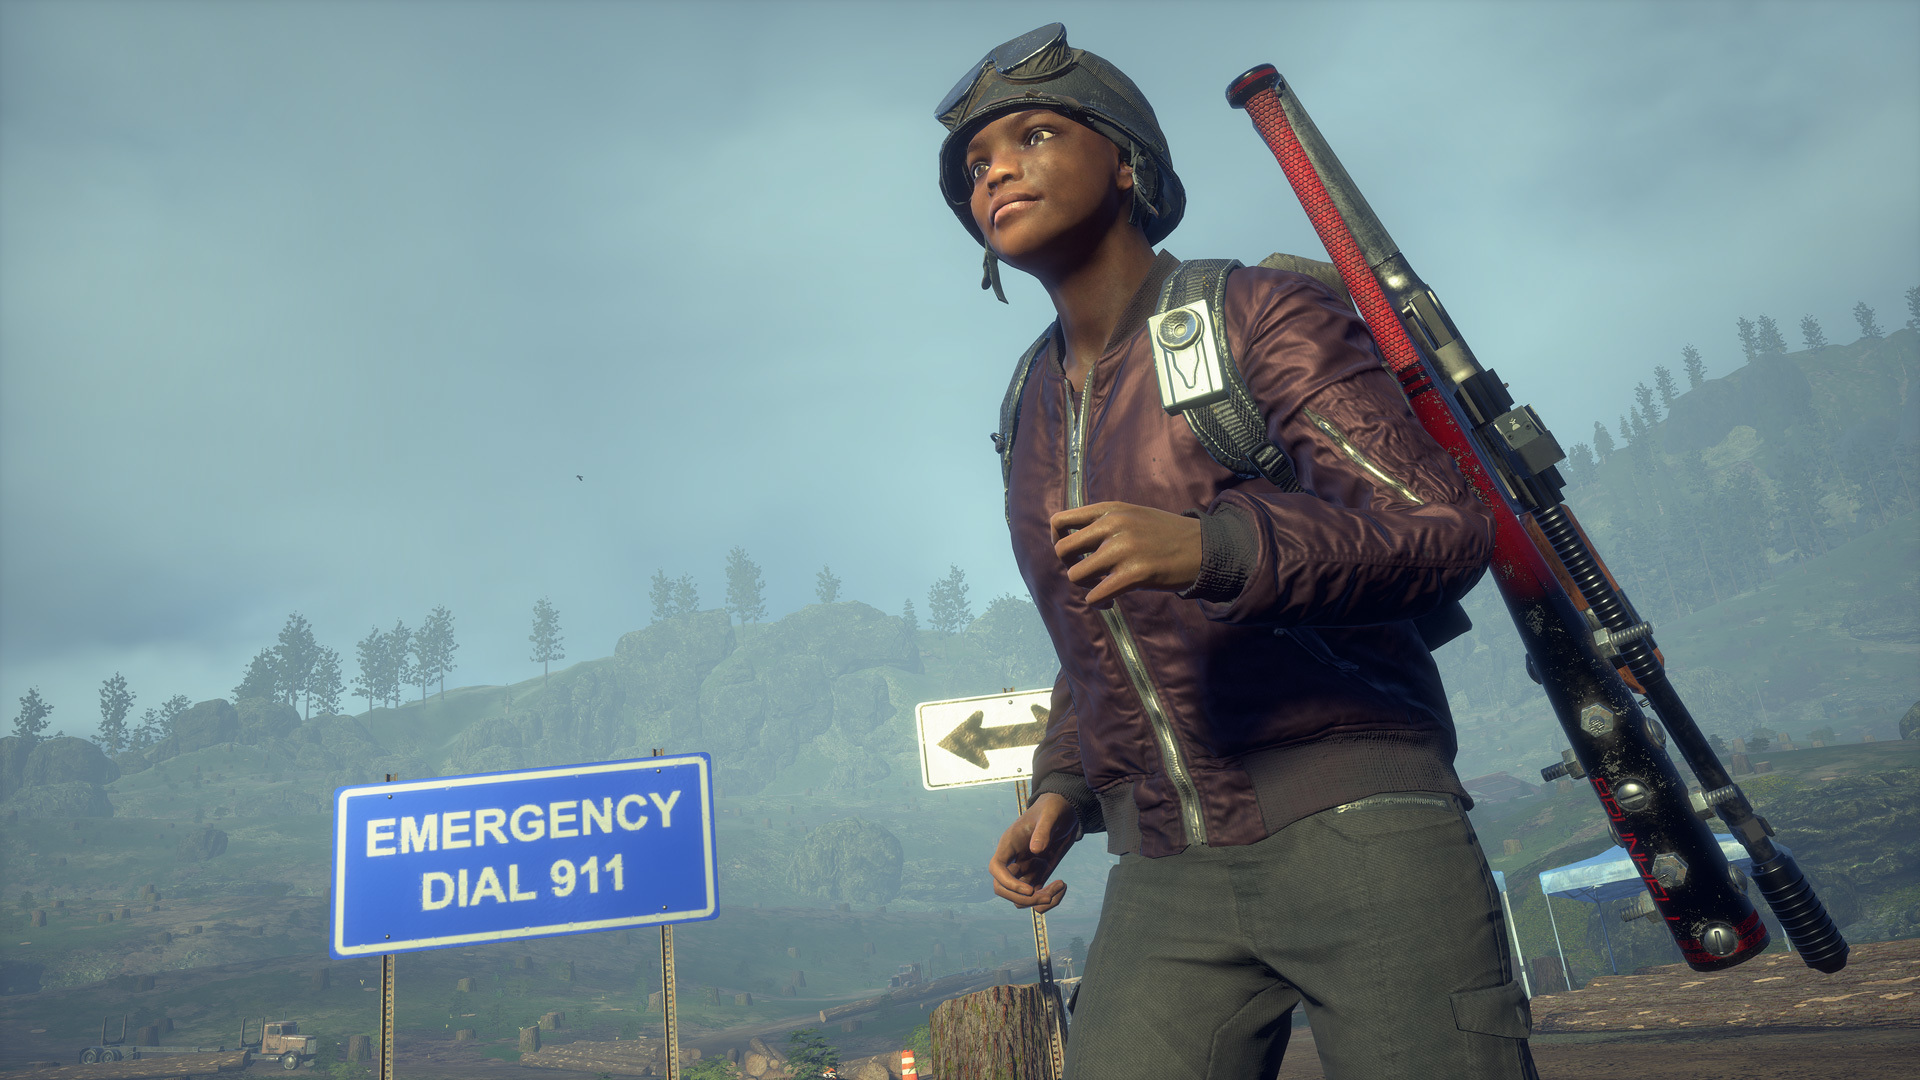 New Weapons, New Map, Remastered Graphics - State of Decay 2